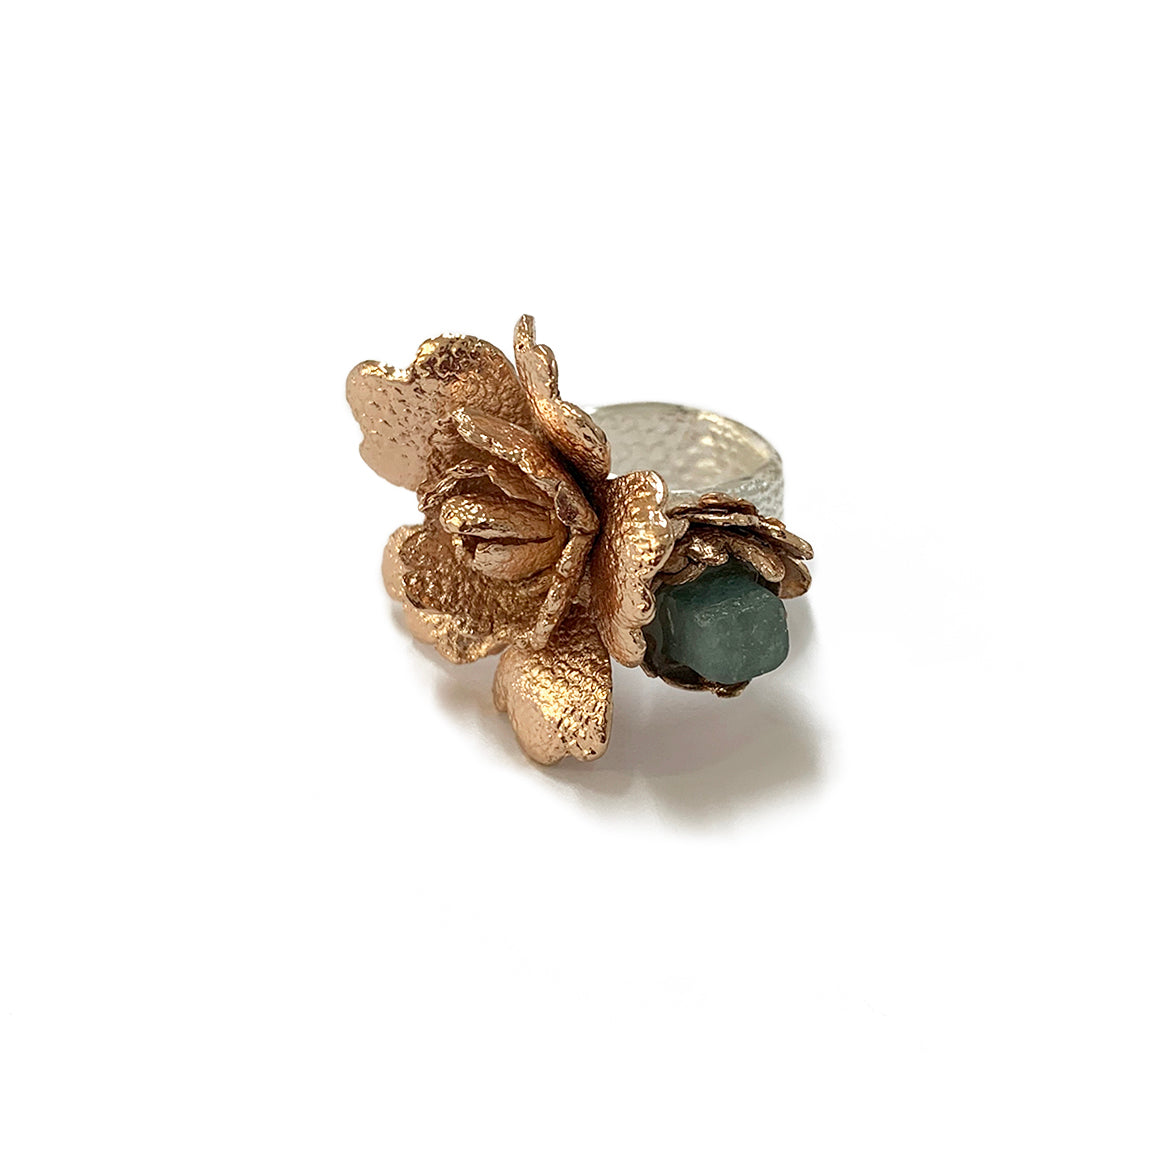 Organic ring with stone